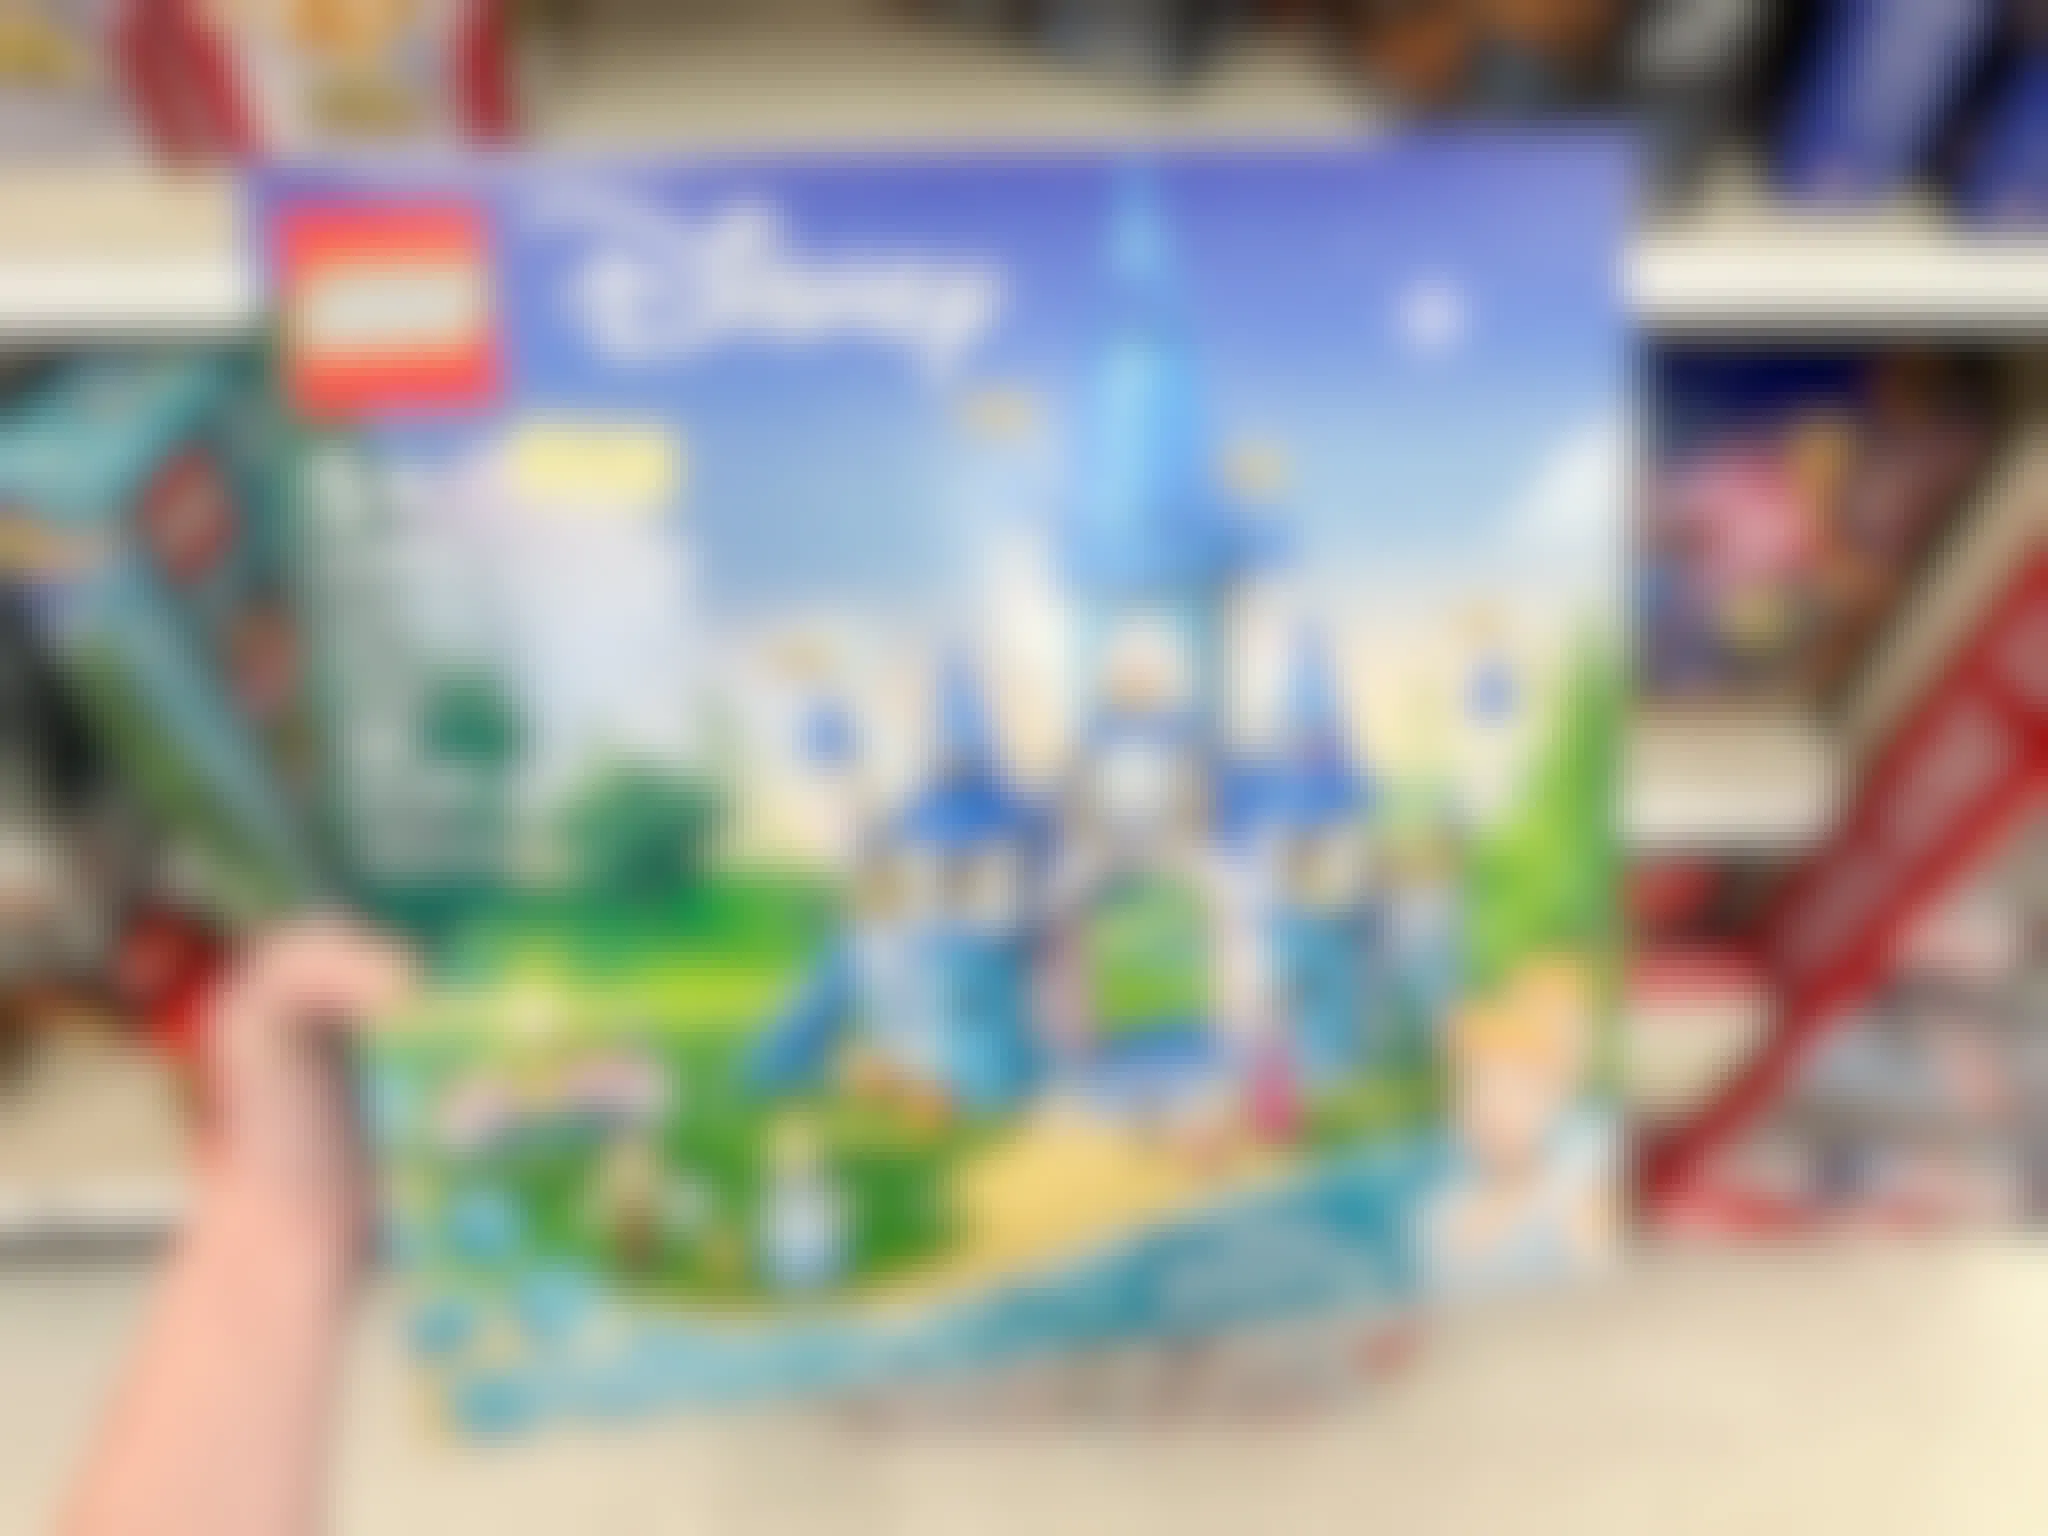 lego disney princess set with a clearance sticker at target